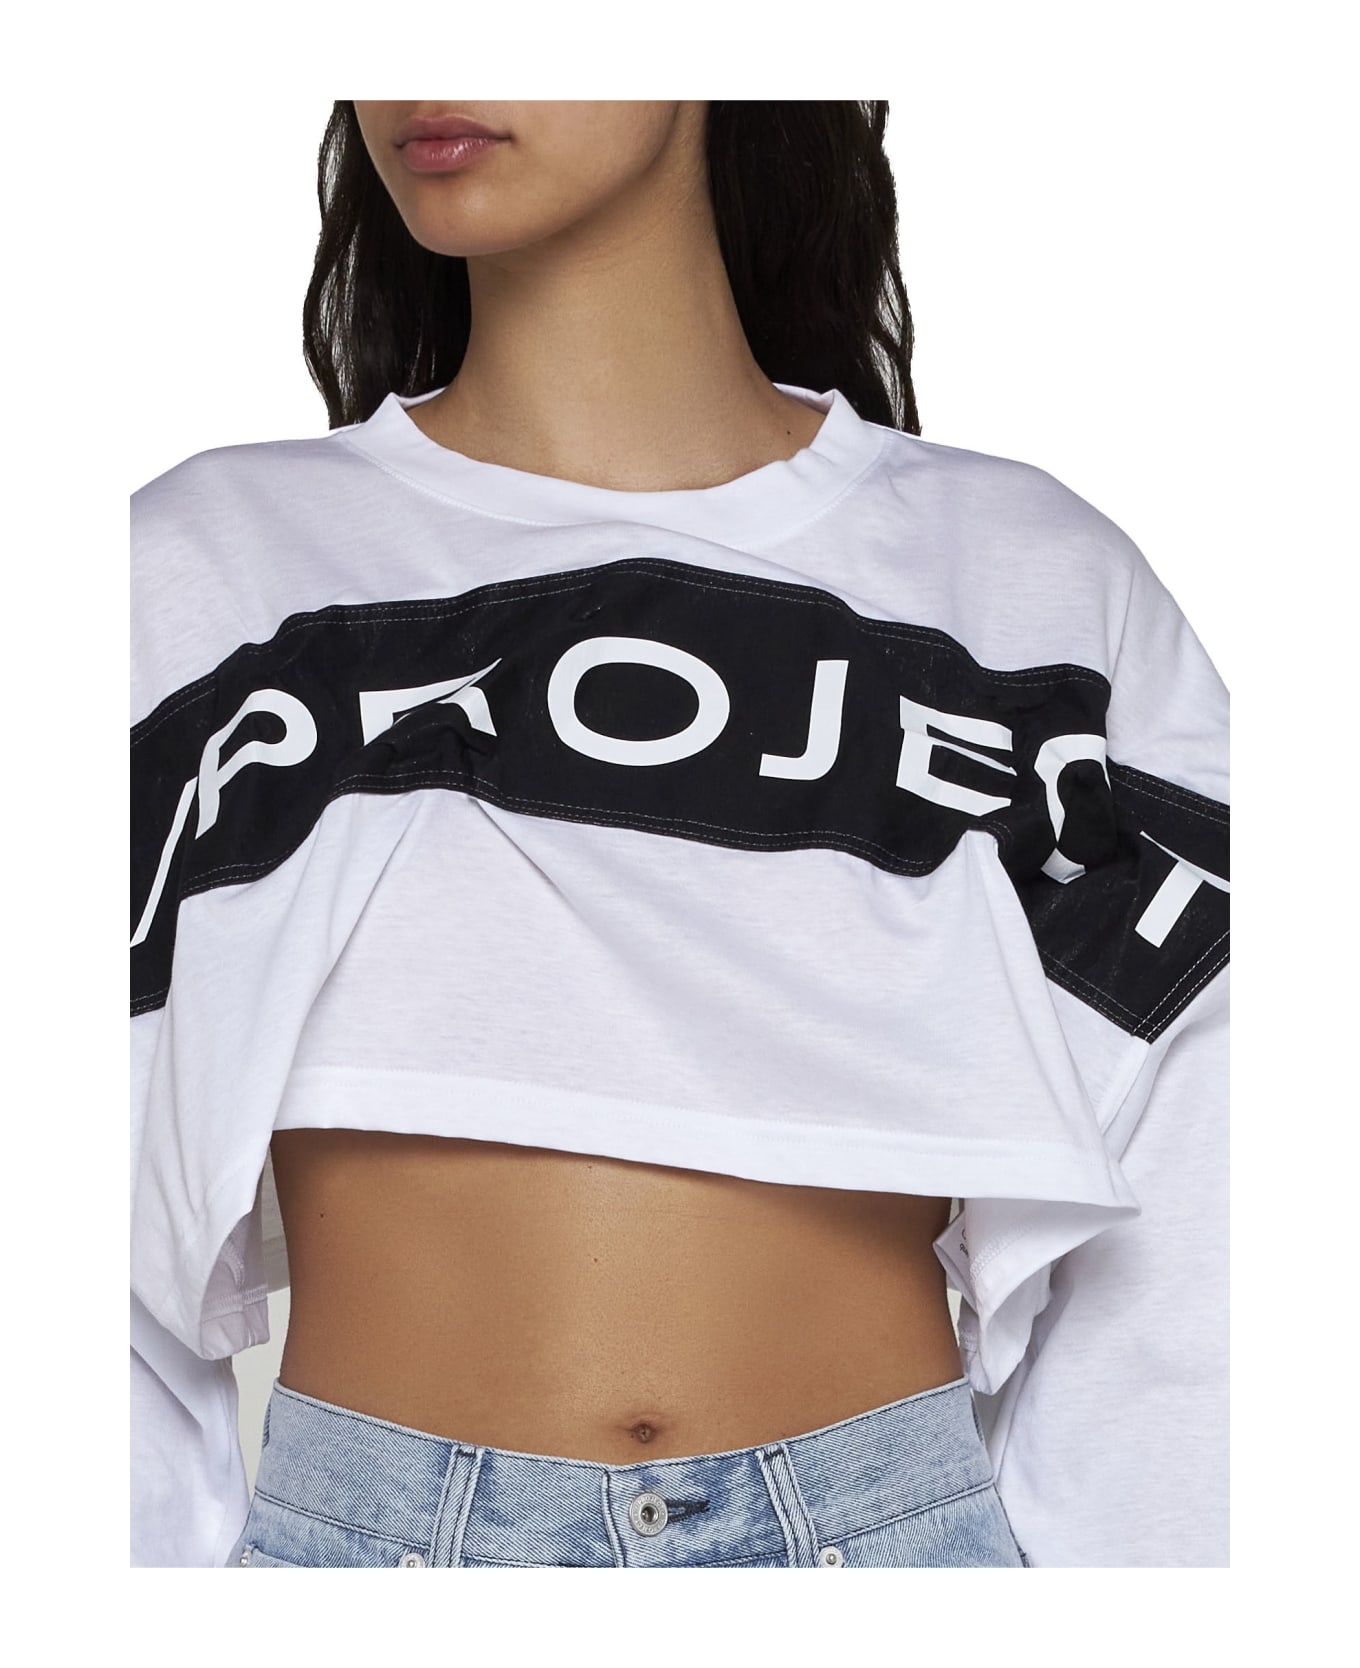 Y/Project Top - Optic white